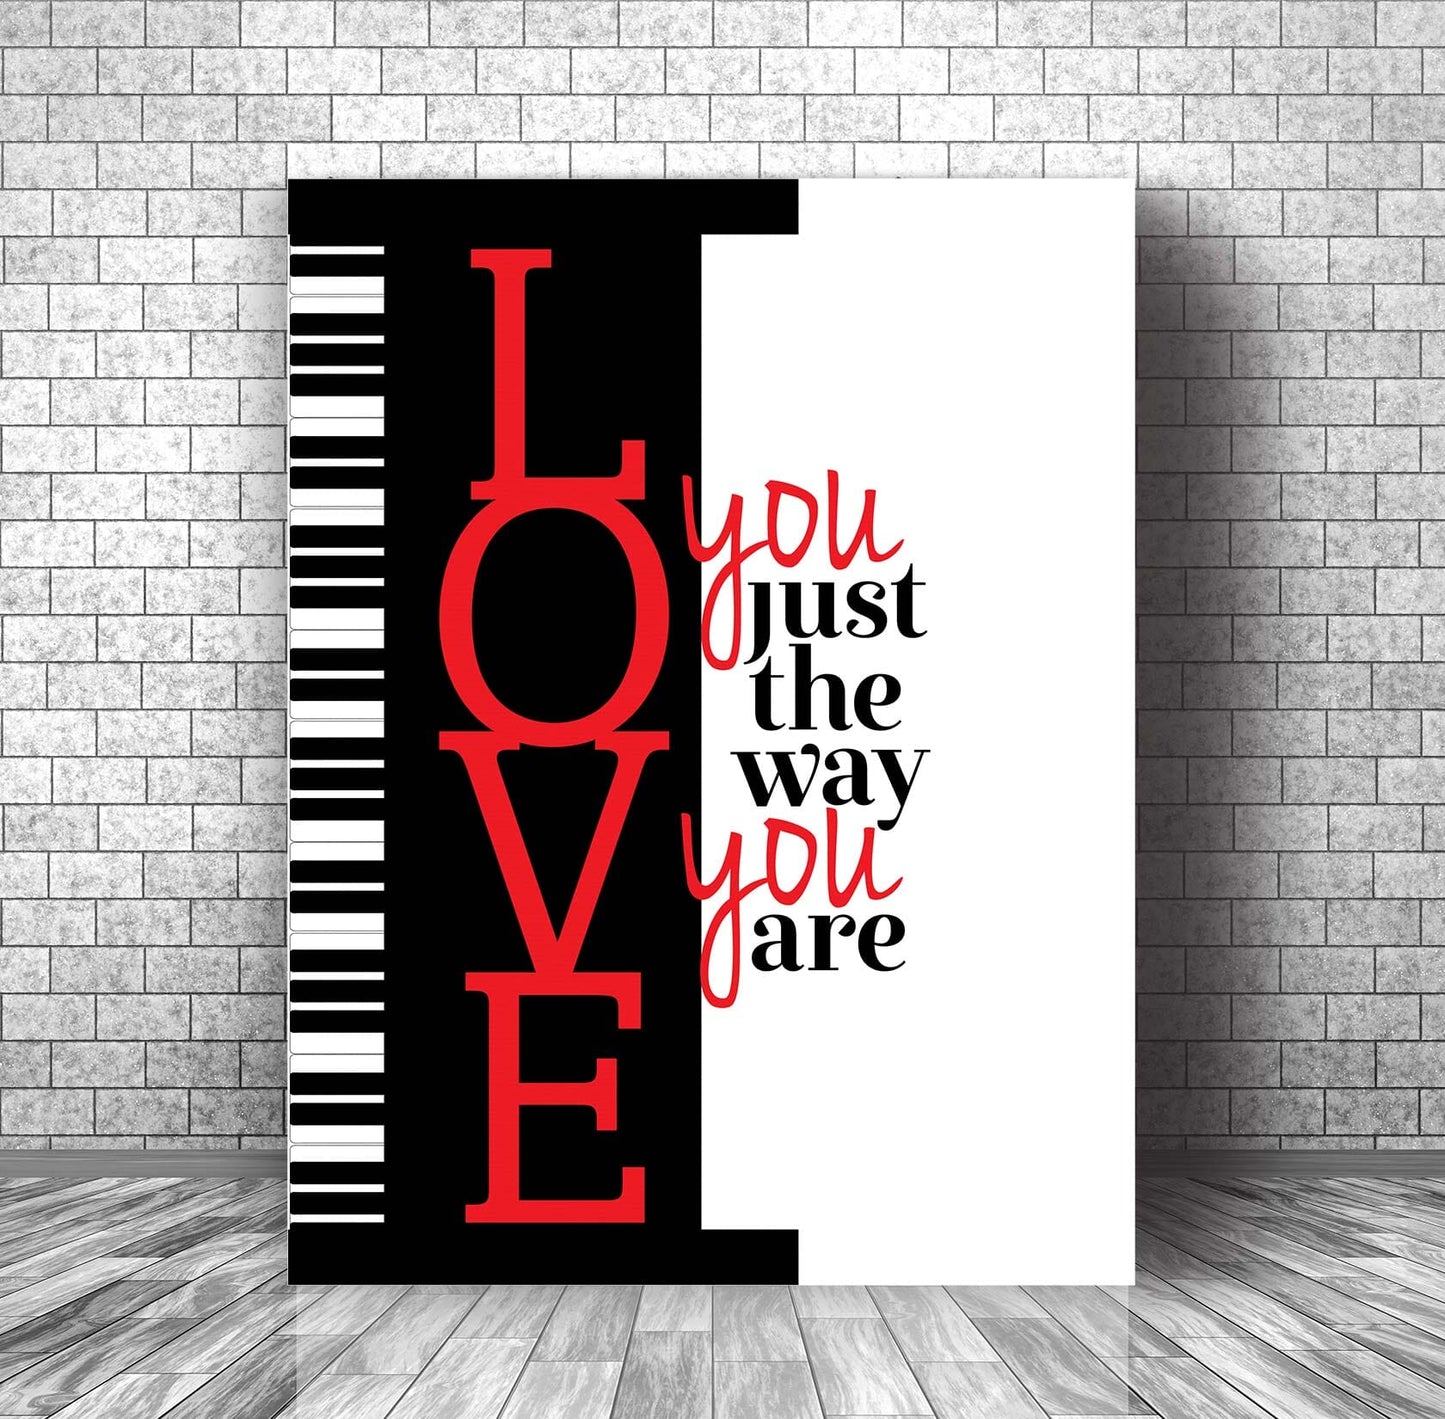 I Love You Just the Way You Are by Billy Joel - Lyrics Art Song Lyrics Art Song Lyrics Art 11x14 Canvas Wrap 